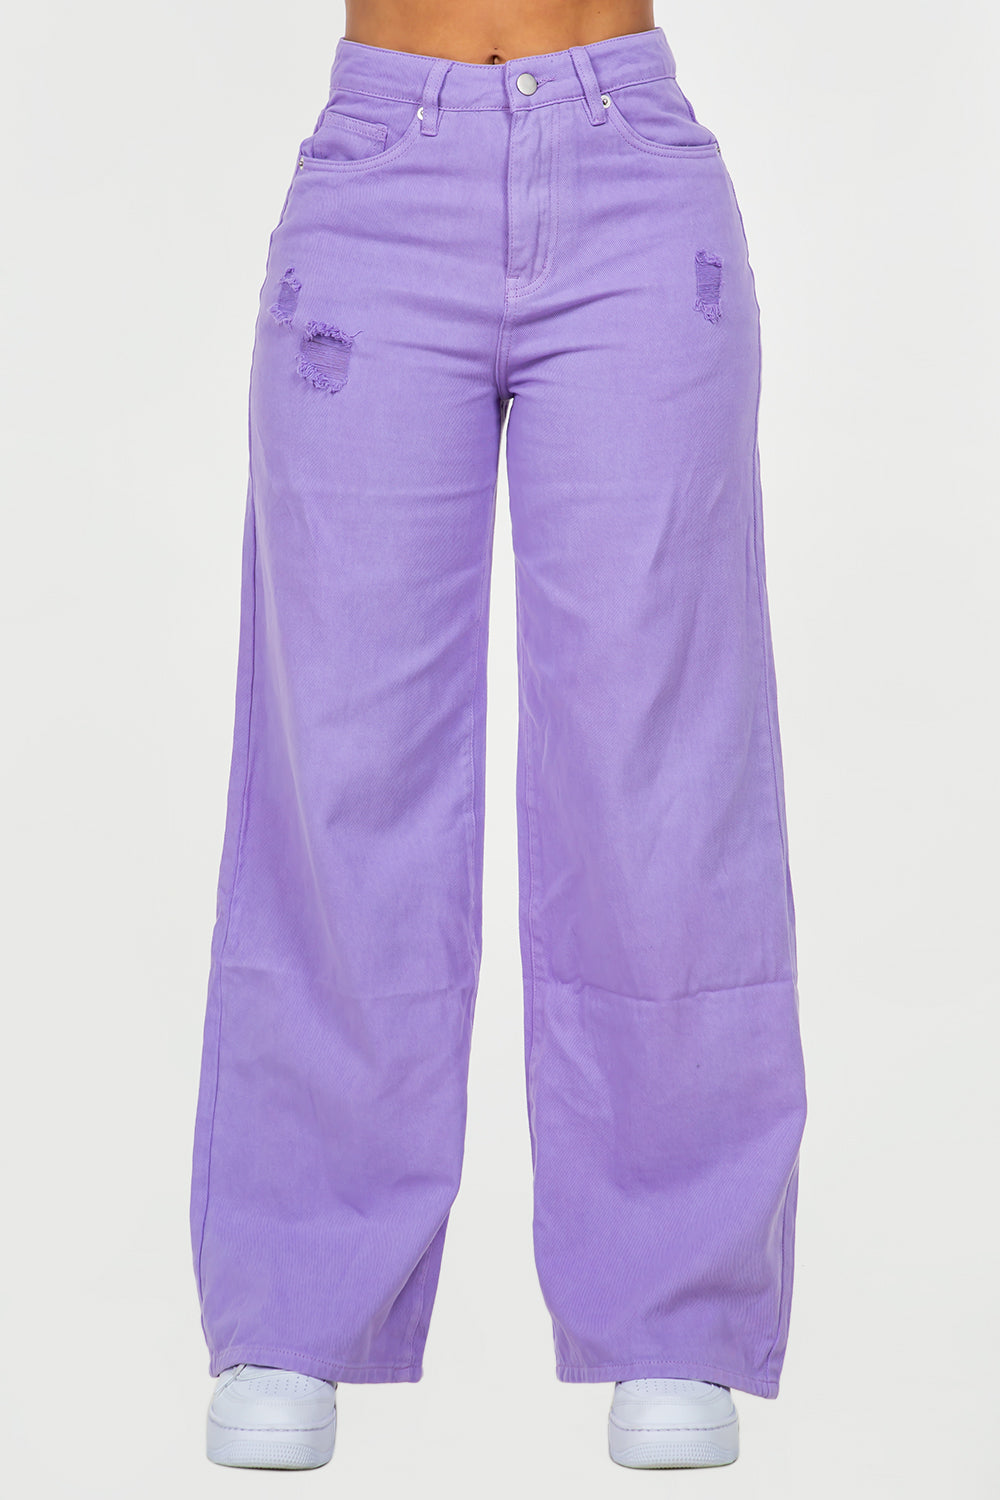 High Waist Distressed Colored Denim Wide Pants